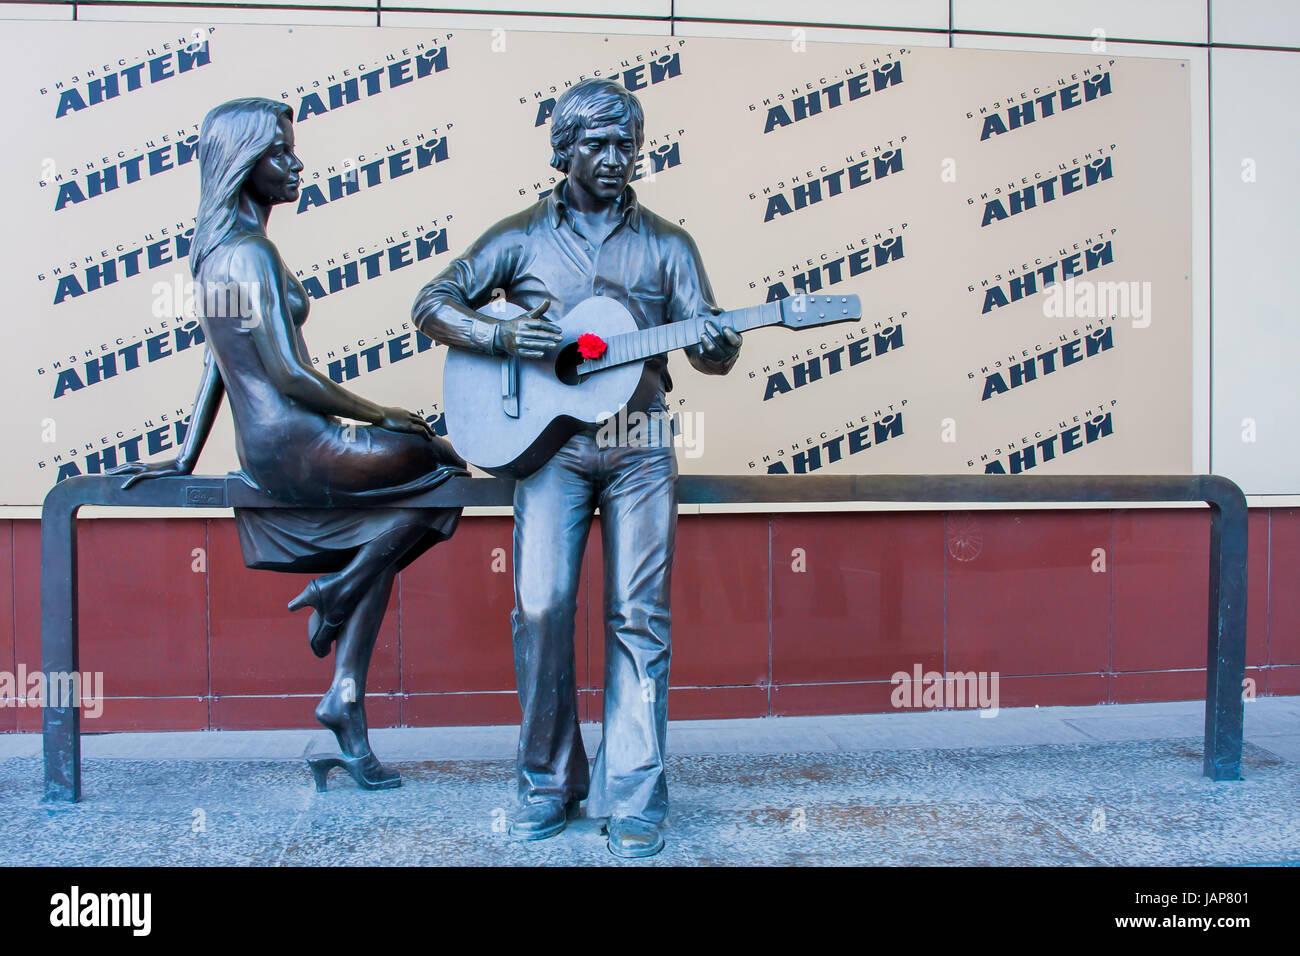 Yekaterinburg, Russia - September 24.2016: The sculpture of Vladimir Vysotsky and Marina Vlady in the hotel 'Antei', Red Army Street Stock Photo